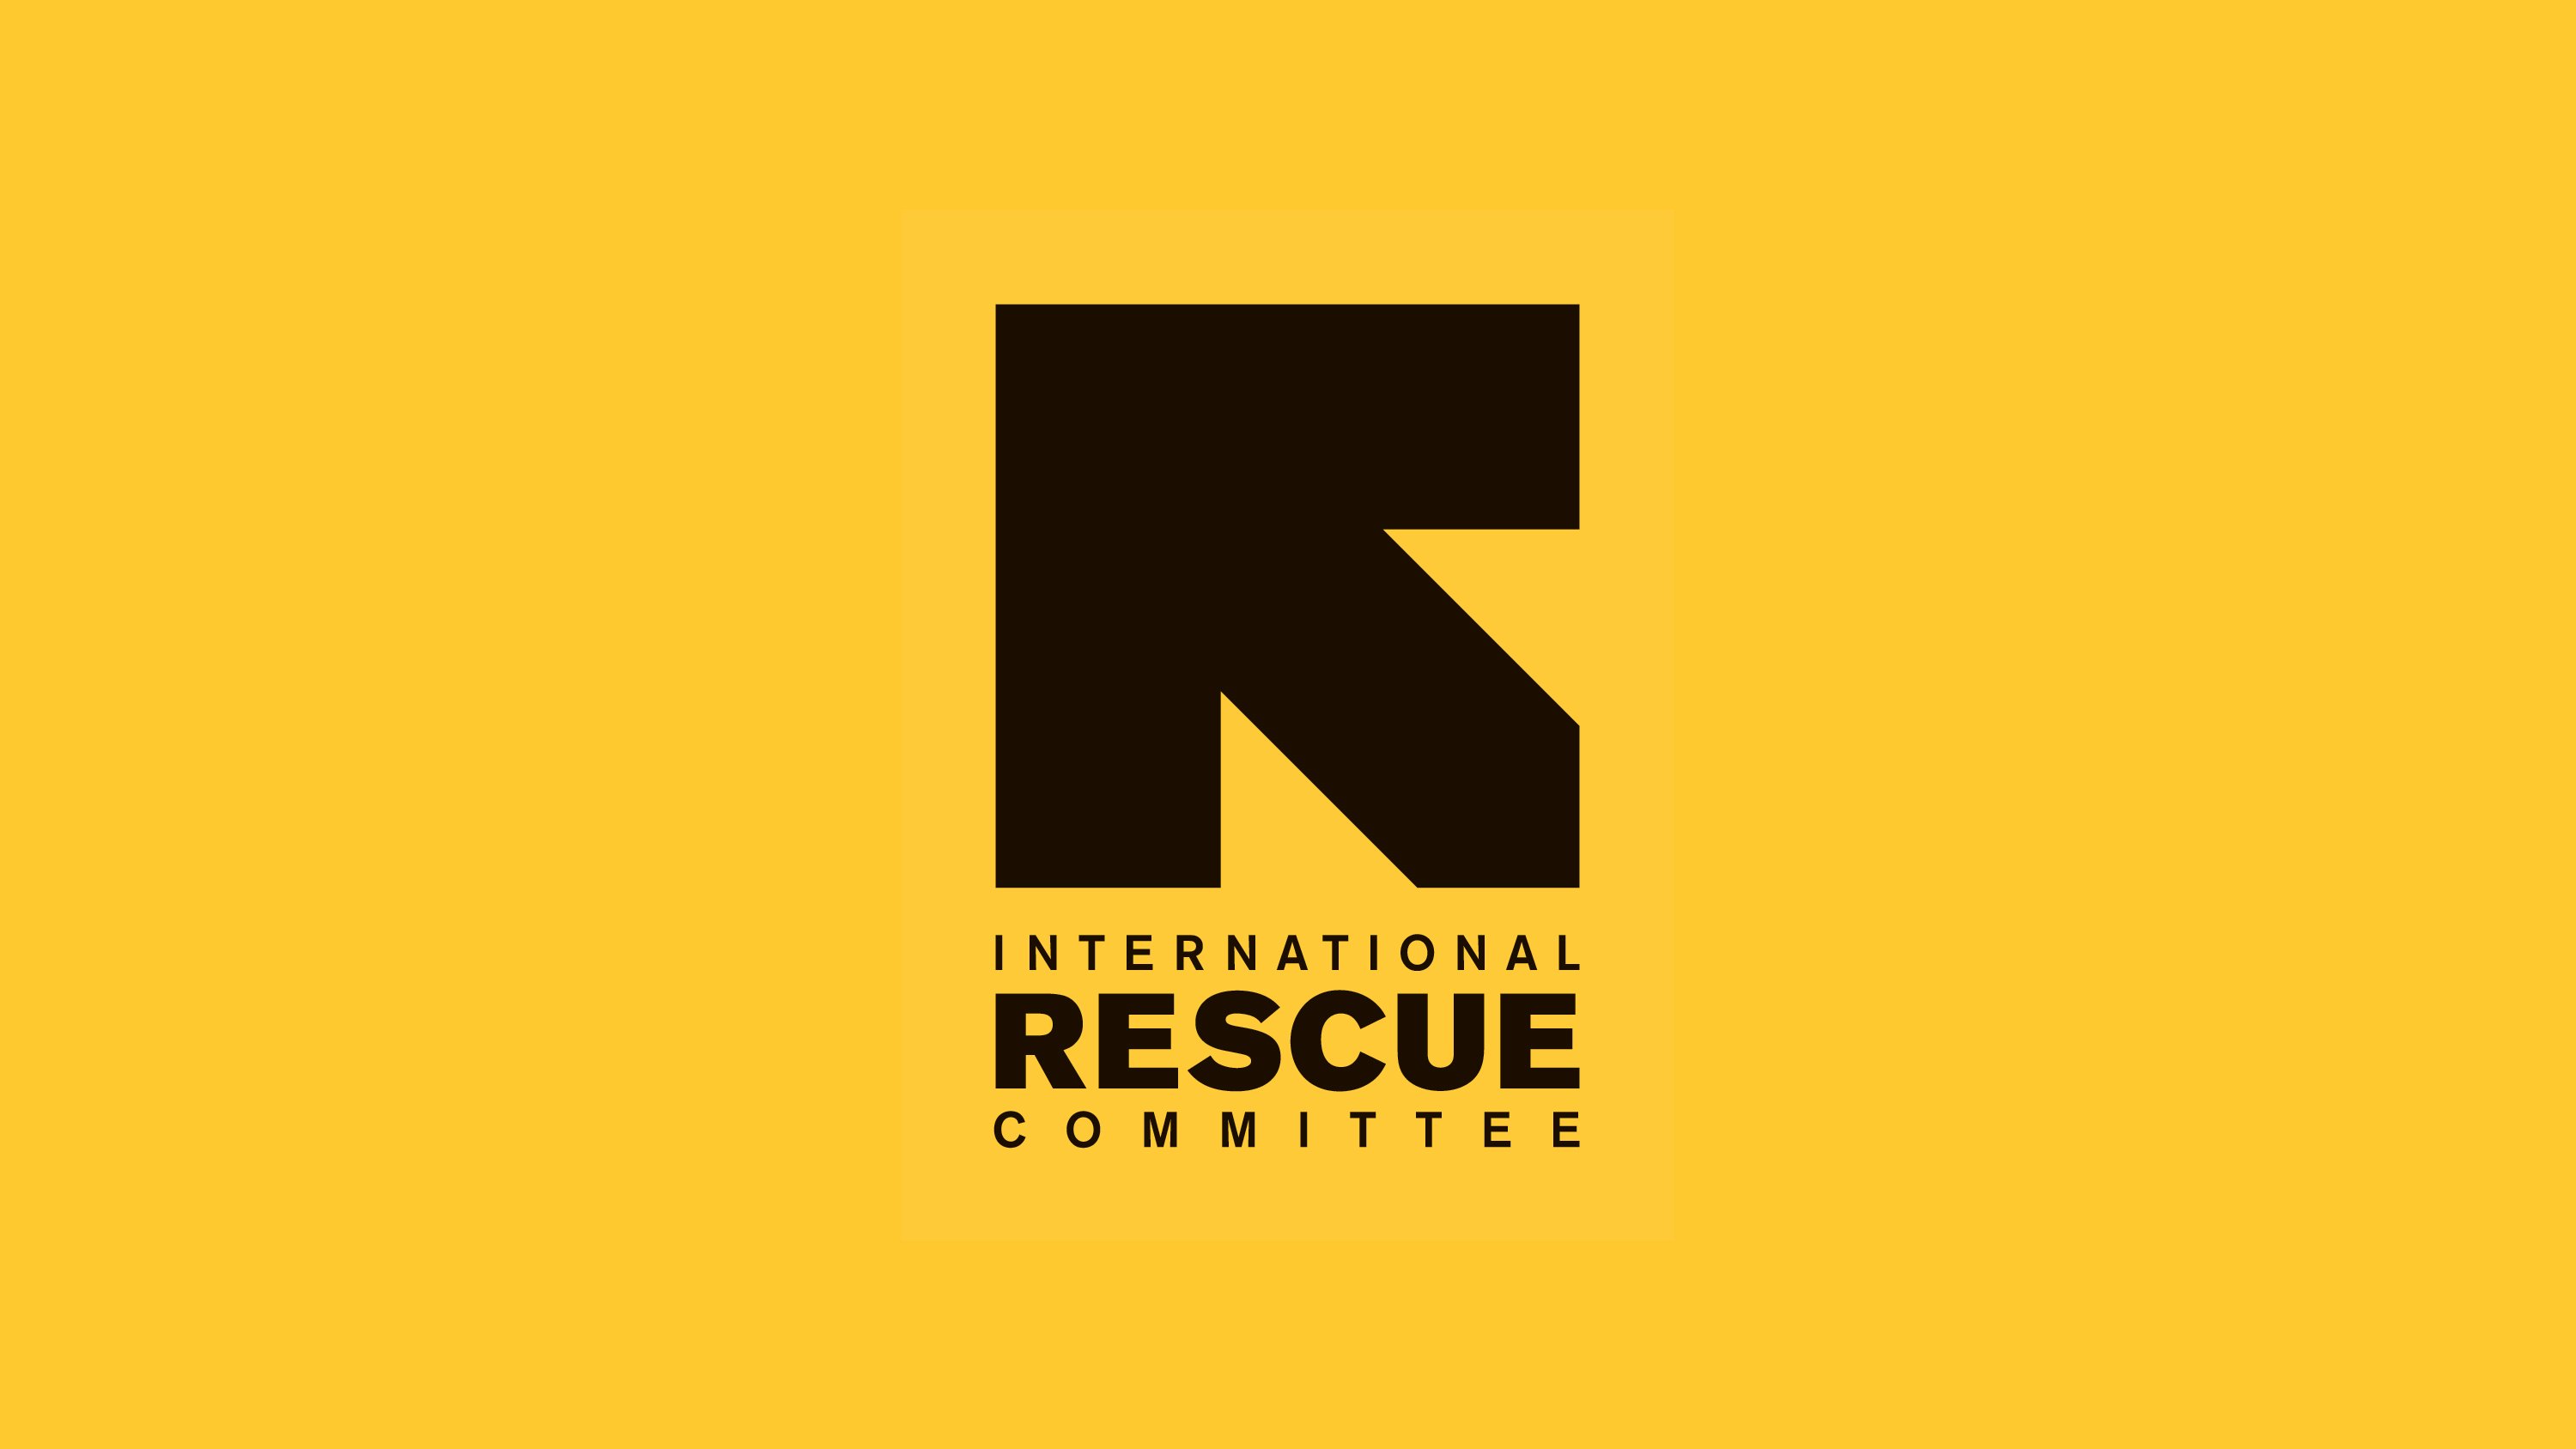 International Rescue Committee (IRC) - International Rescue Committee